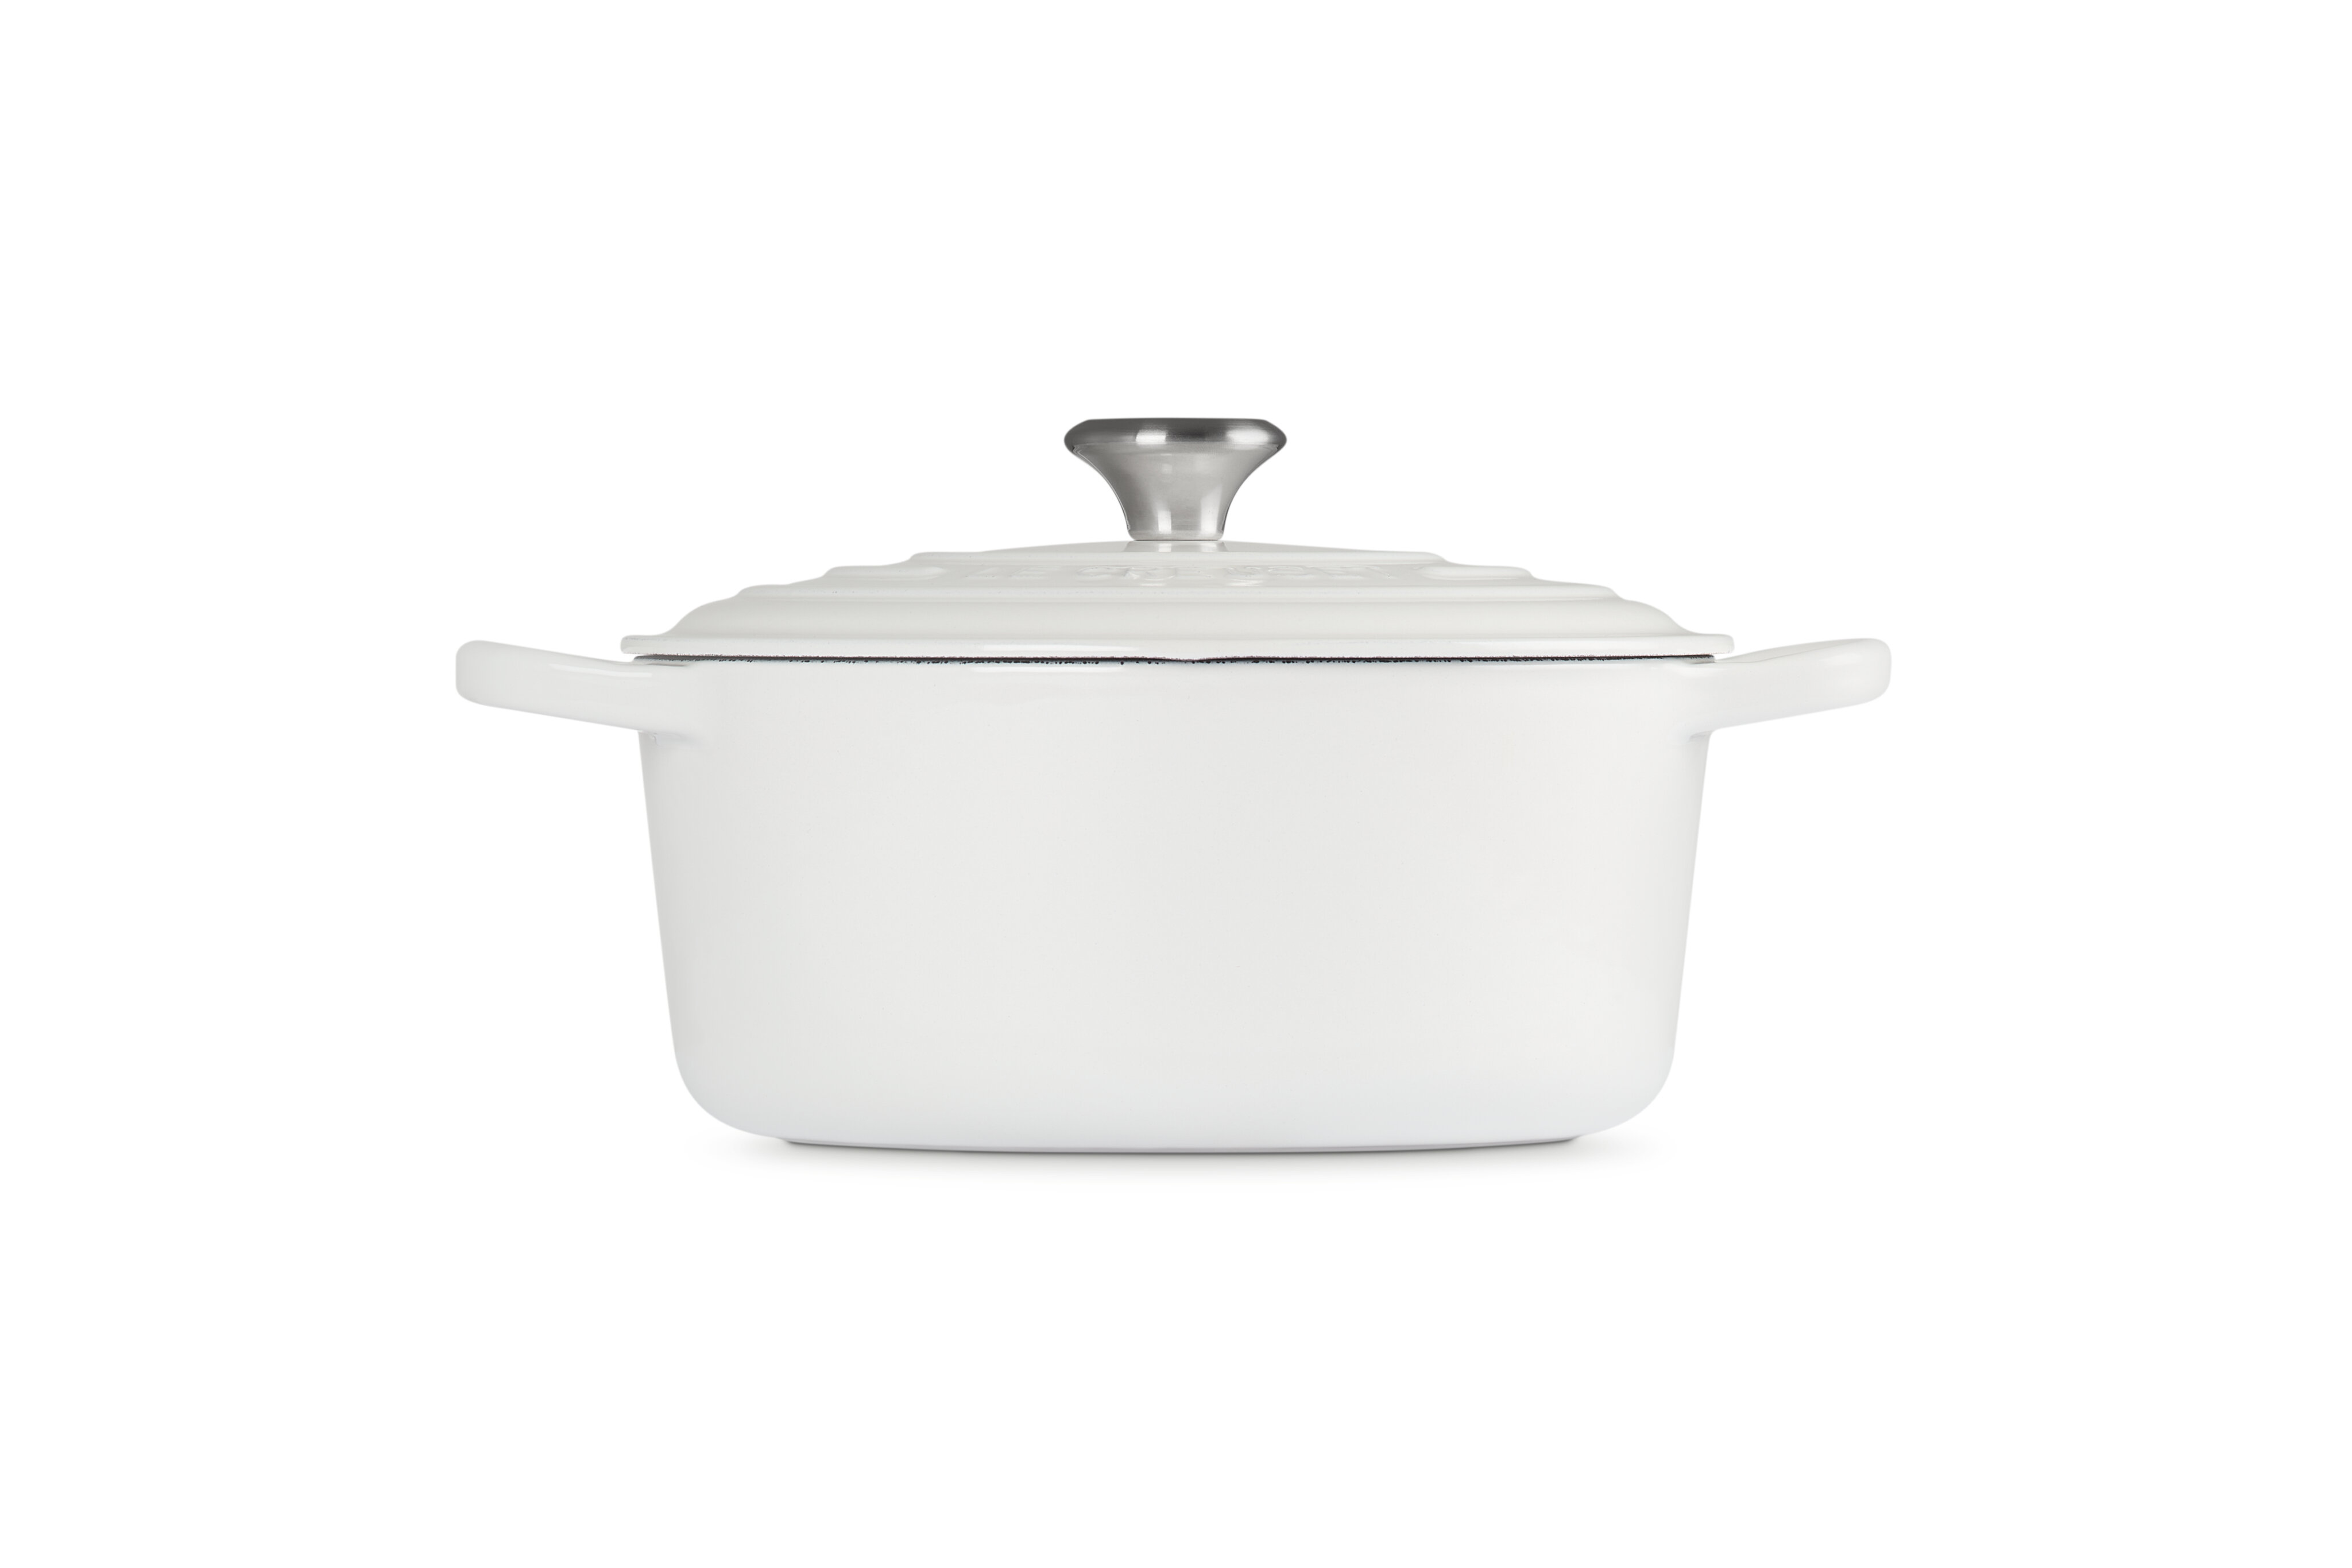 Creuset White Signature Cast Iron Round Dutch Oven with Lid & Reviews | Wayfair